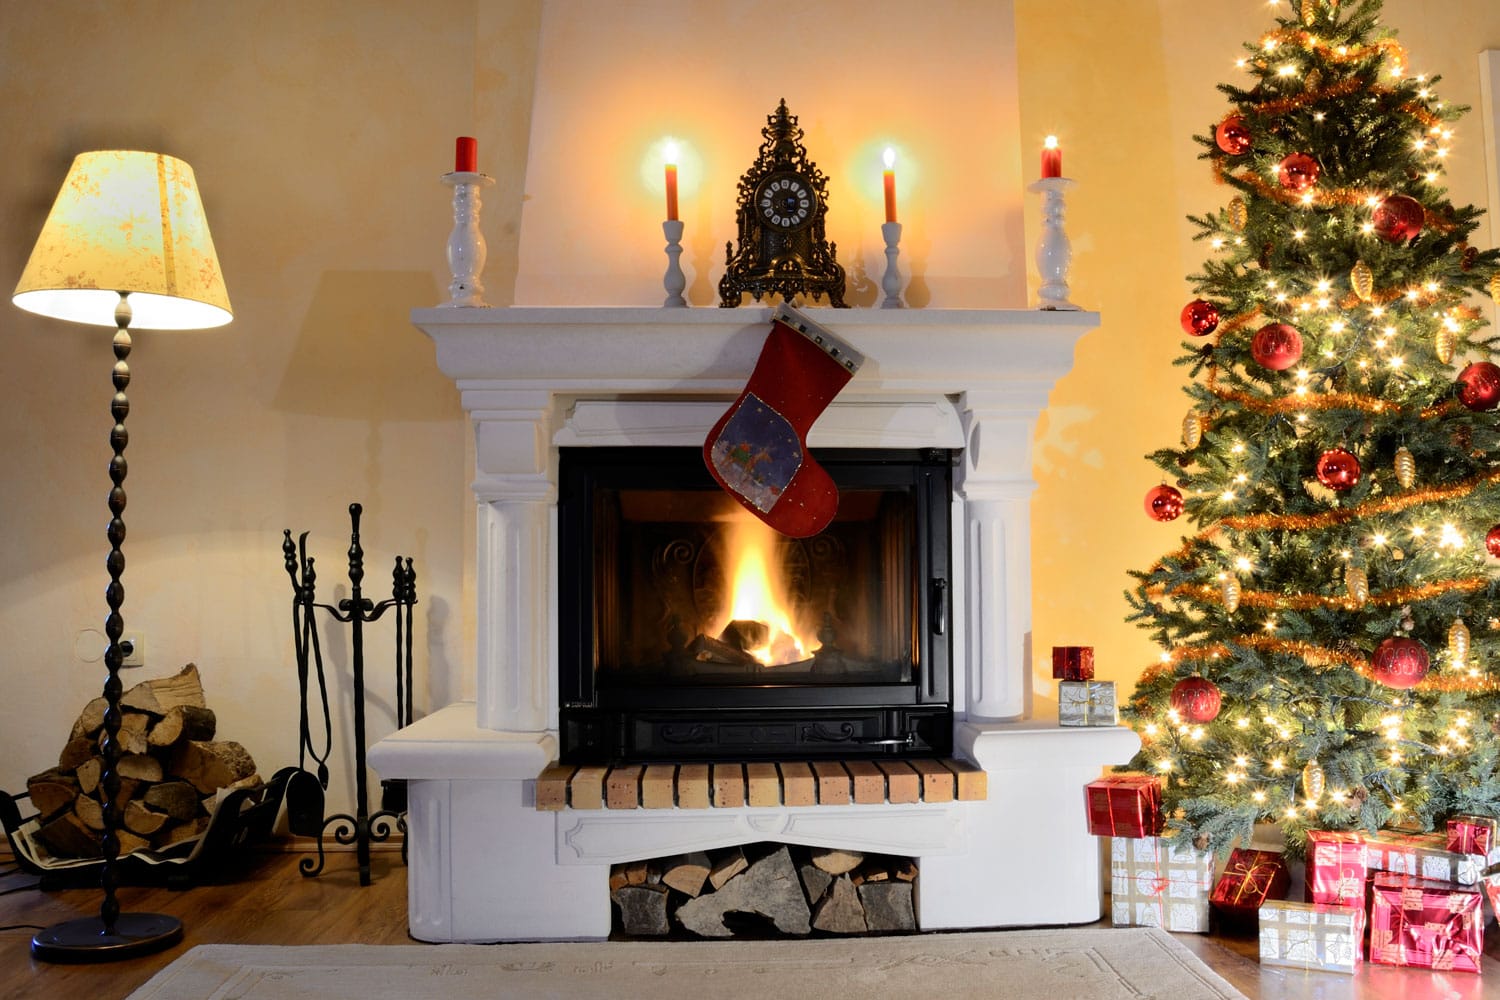 Christmas style on fireplace in living room with floor mat